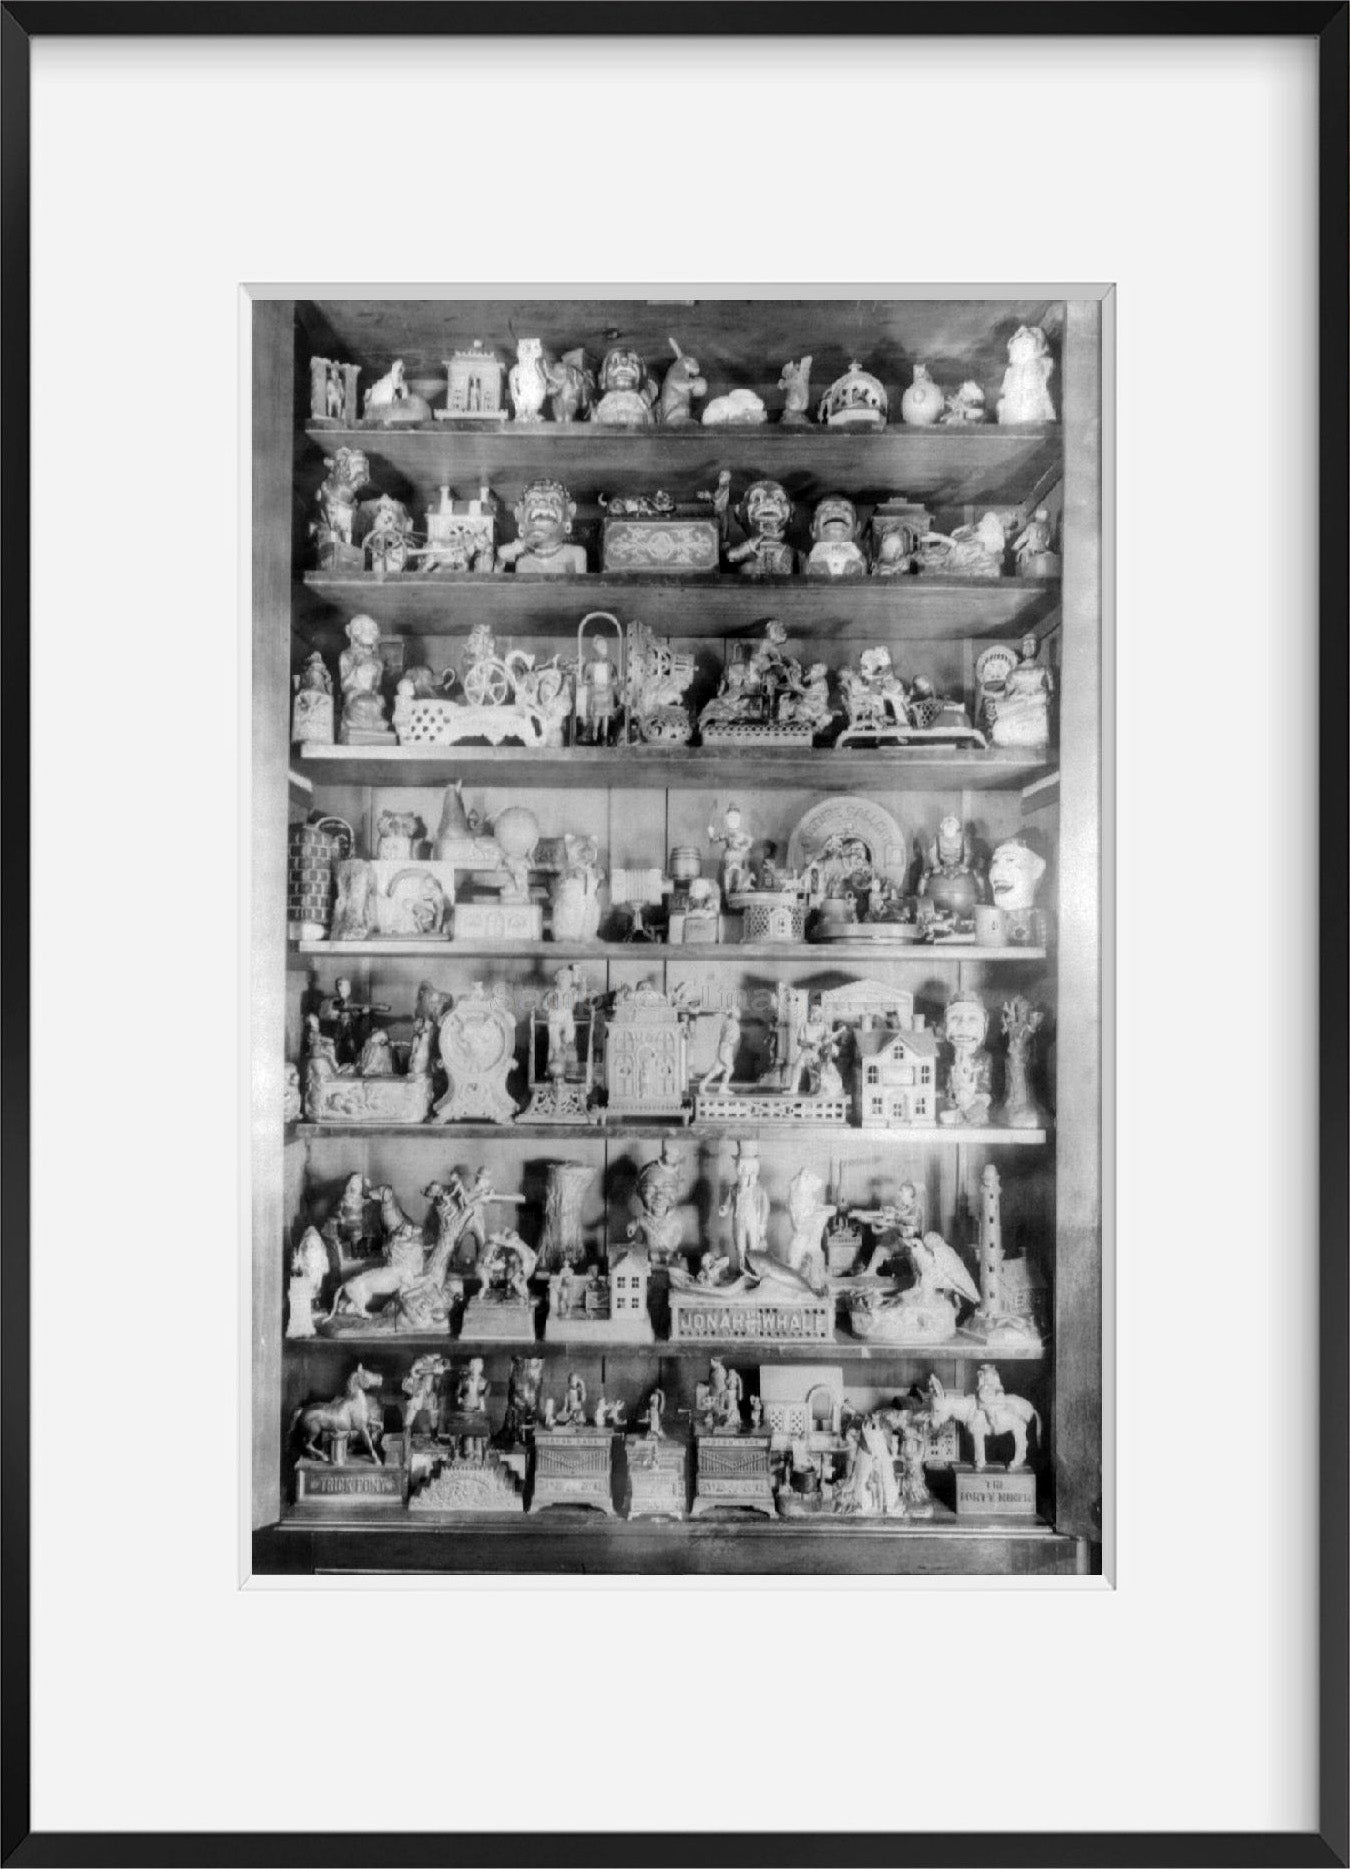 Photo: Shelf display of 100 rare penny banks, c1937, photo by Andrew Emerine, cabin